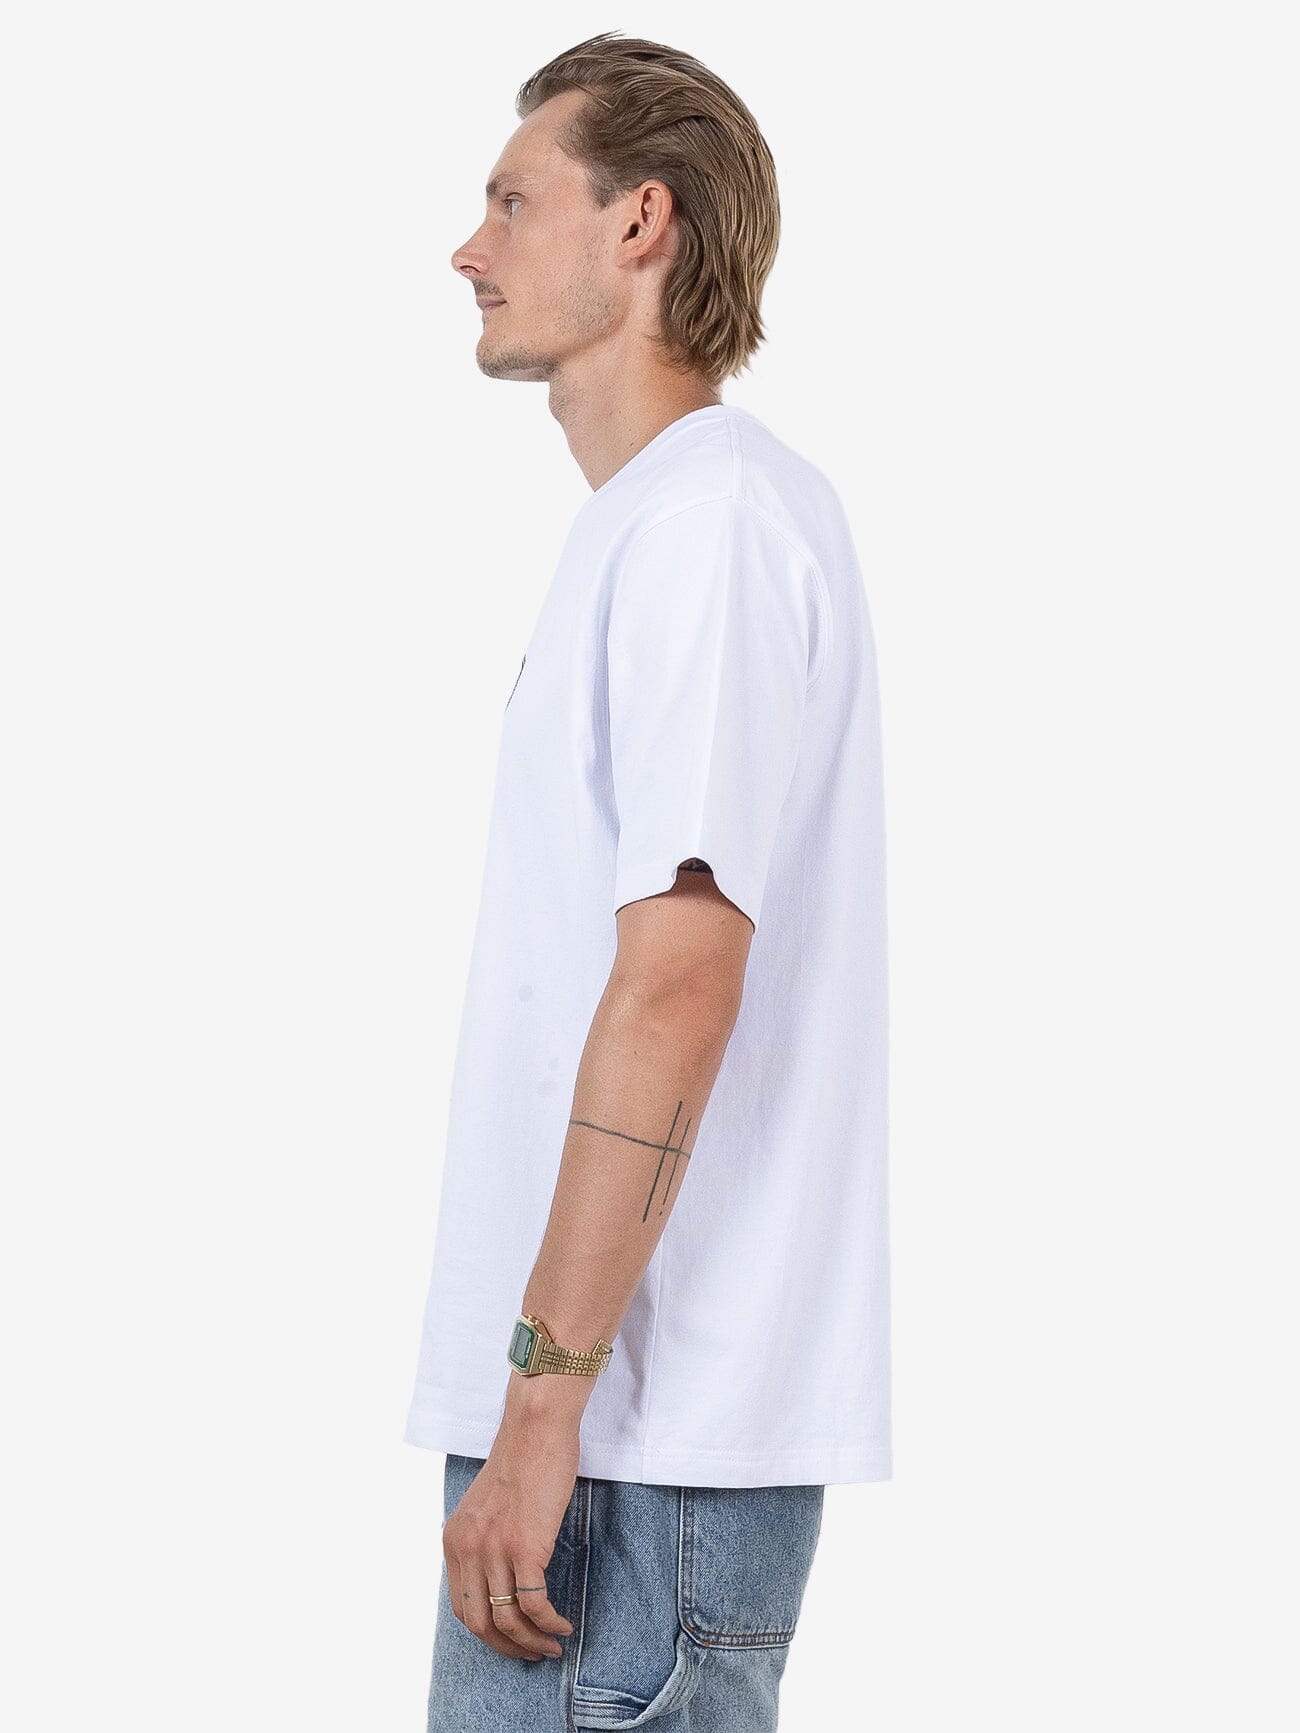 HYC Workmate Oversize Fit Tee - White